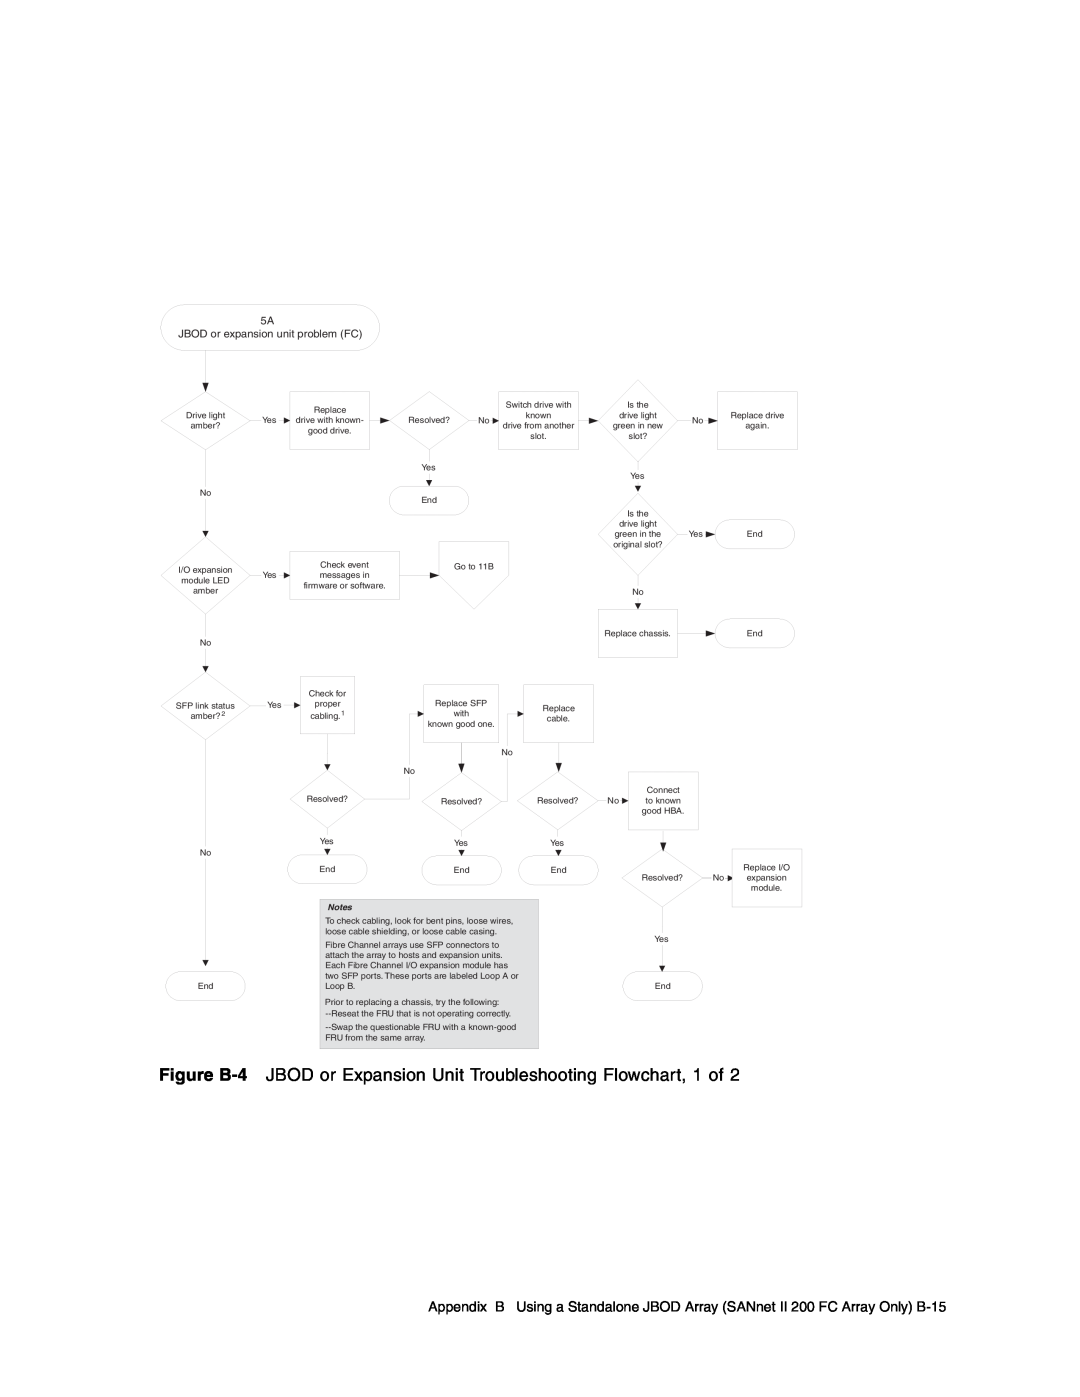 Dot Hill Systems II 200 FC service manual Figure B-4 JBOD or Expansion Unit Troubleshooting Flowchart, 1 of 